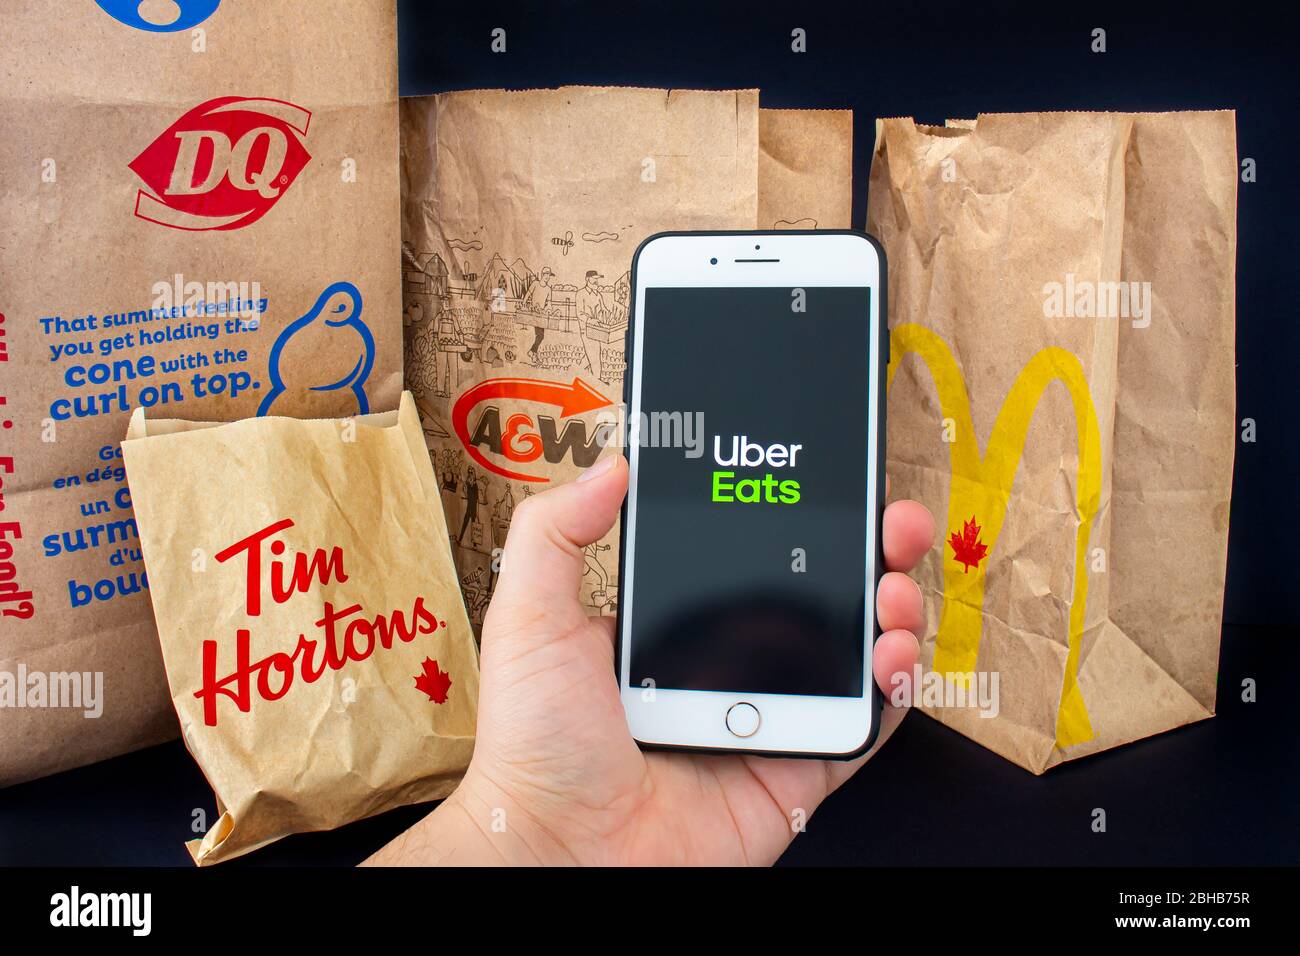 Calgary, Alberta. Canada. April 24, 2020: A person holding an iPhone Plus with the Uber Eats application open with delivered food bags from Tim Hourto Stock Photo